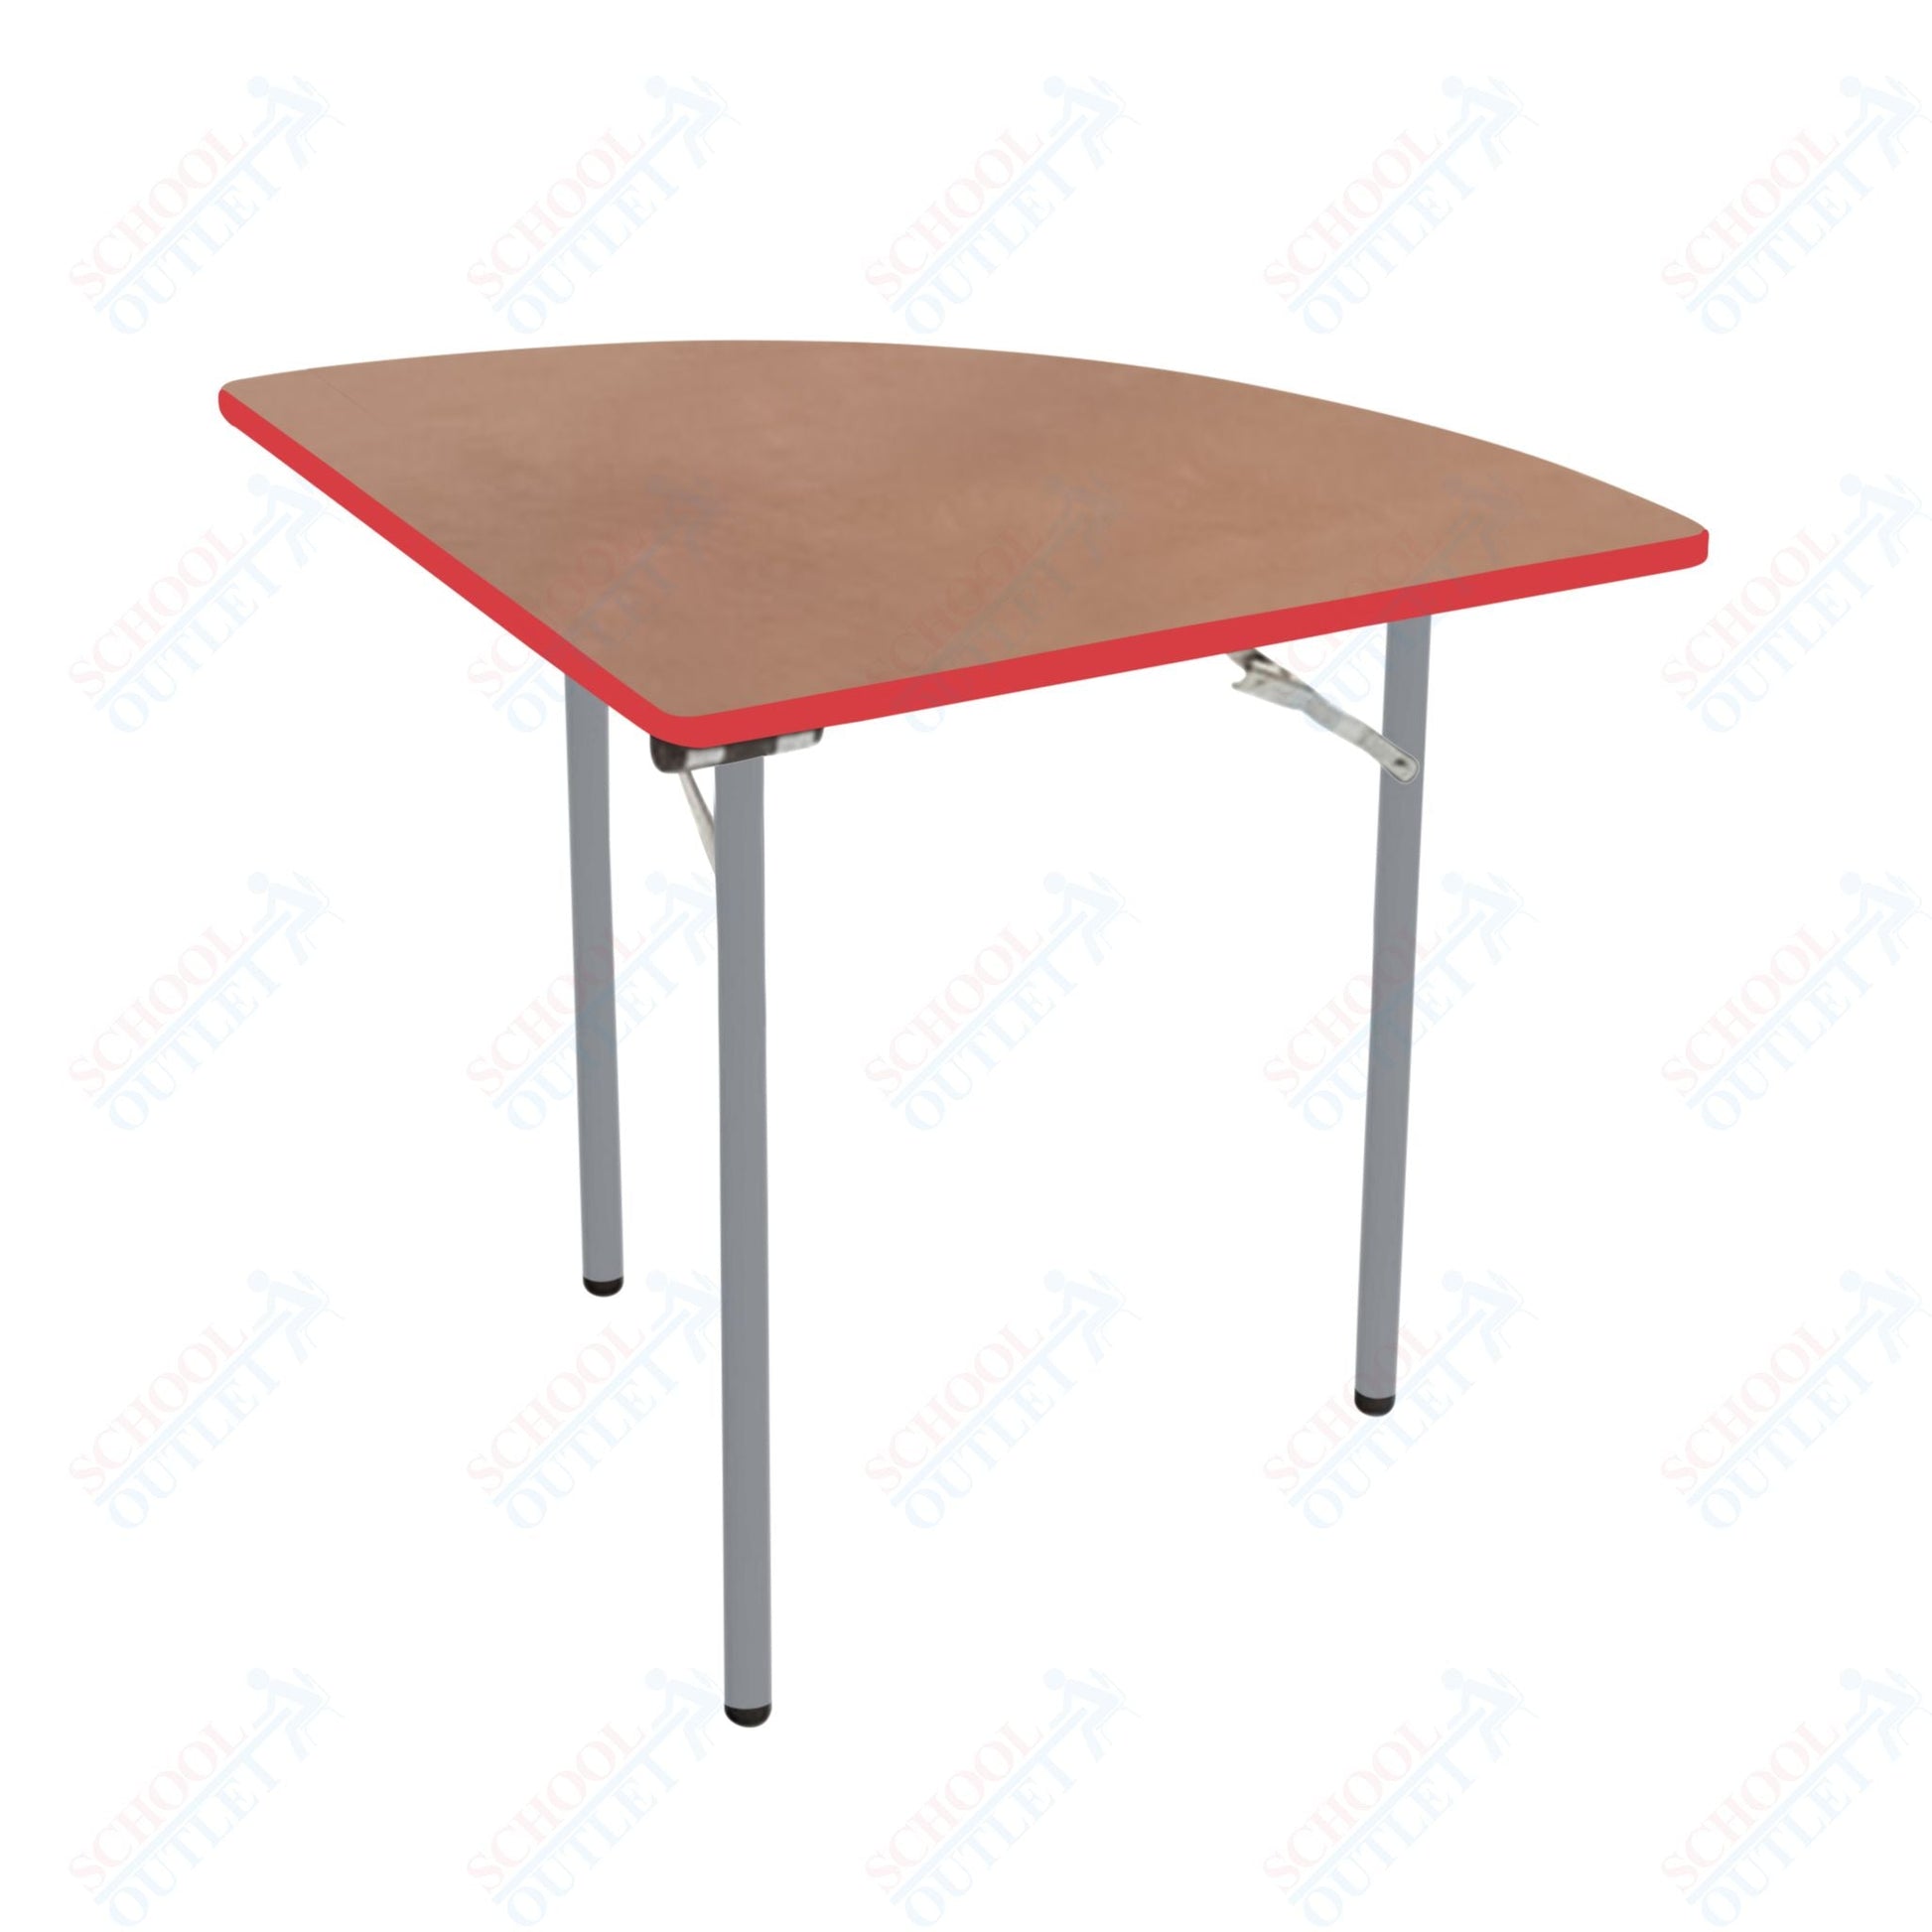 AmTab Folding Table - Plywood Stained and Sealed - Vinyl T - Molding Edge - Quarter Round - Quarter 60" Diameter x 29"H (AmTab AMT - QR60PM) - SchoolOutlet